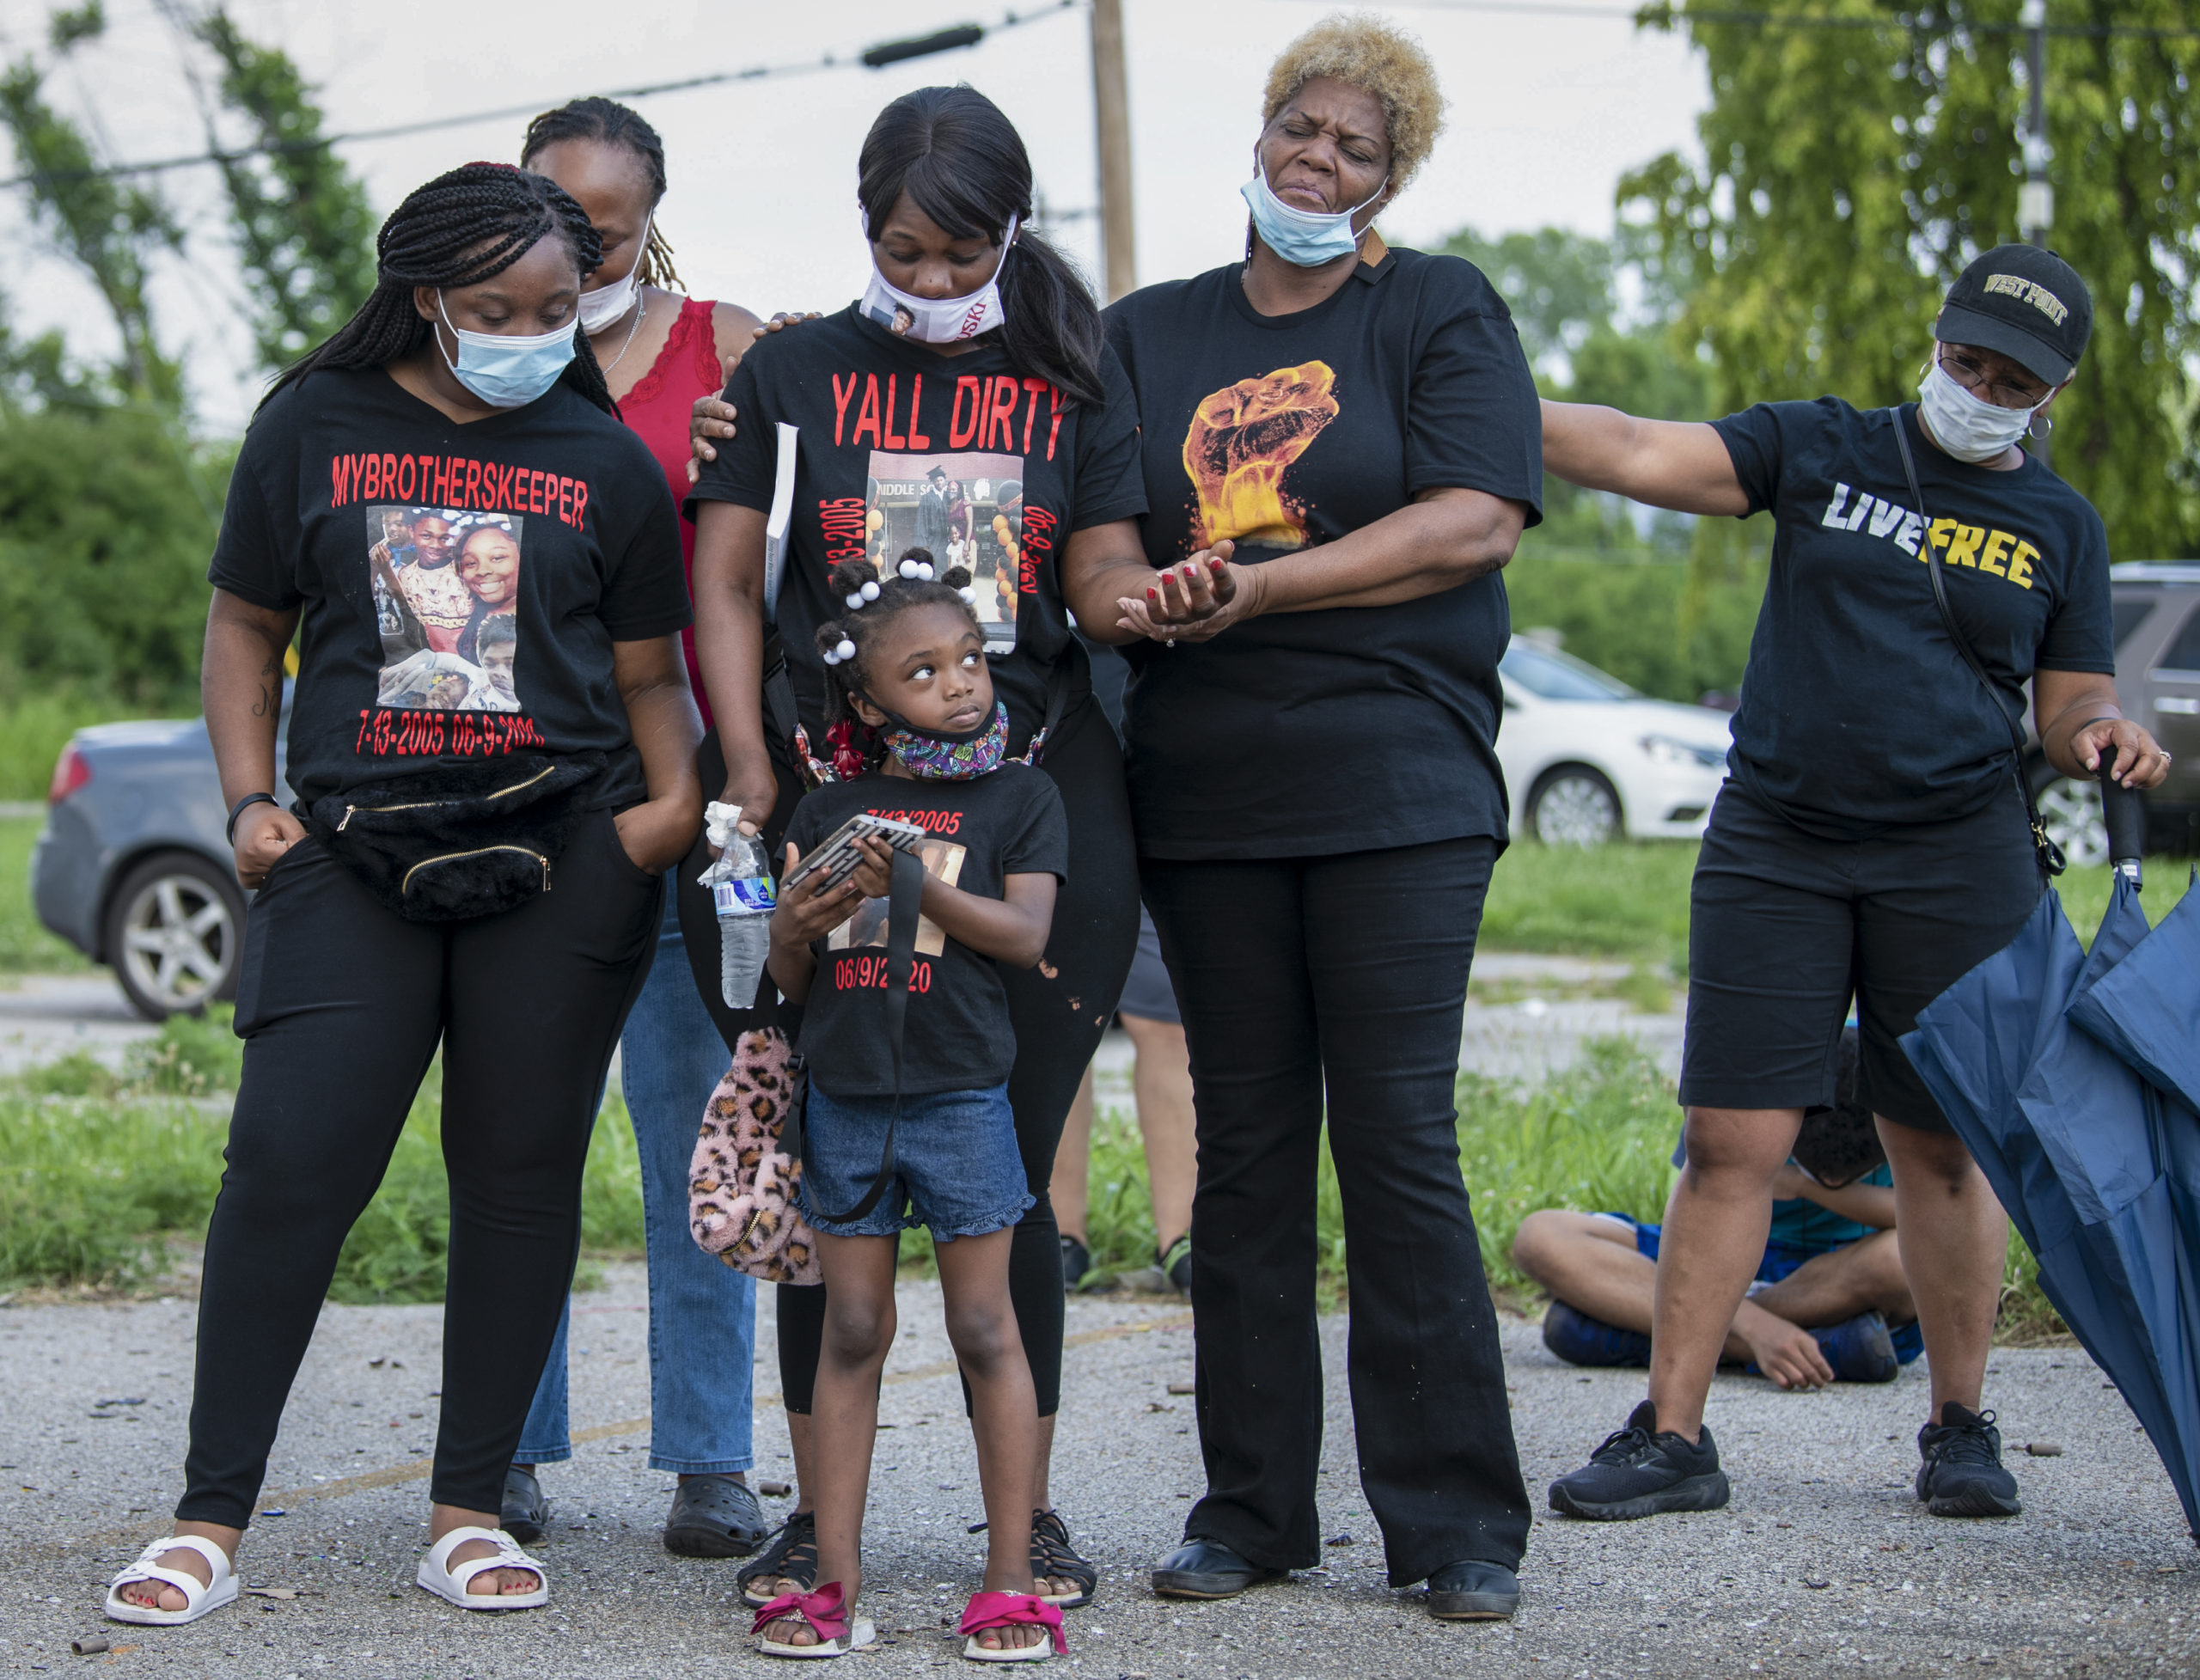 Ceremony for 14-year-old Kyeiontae Stidimire